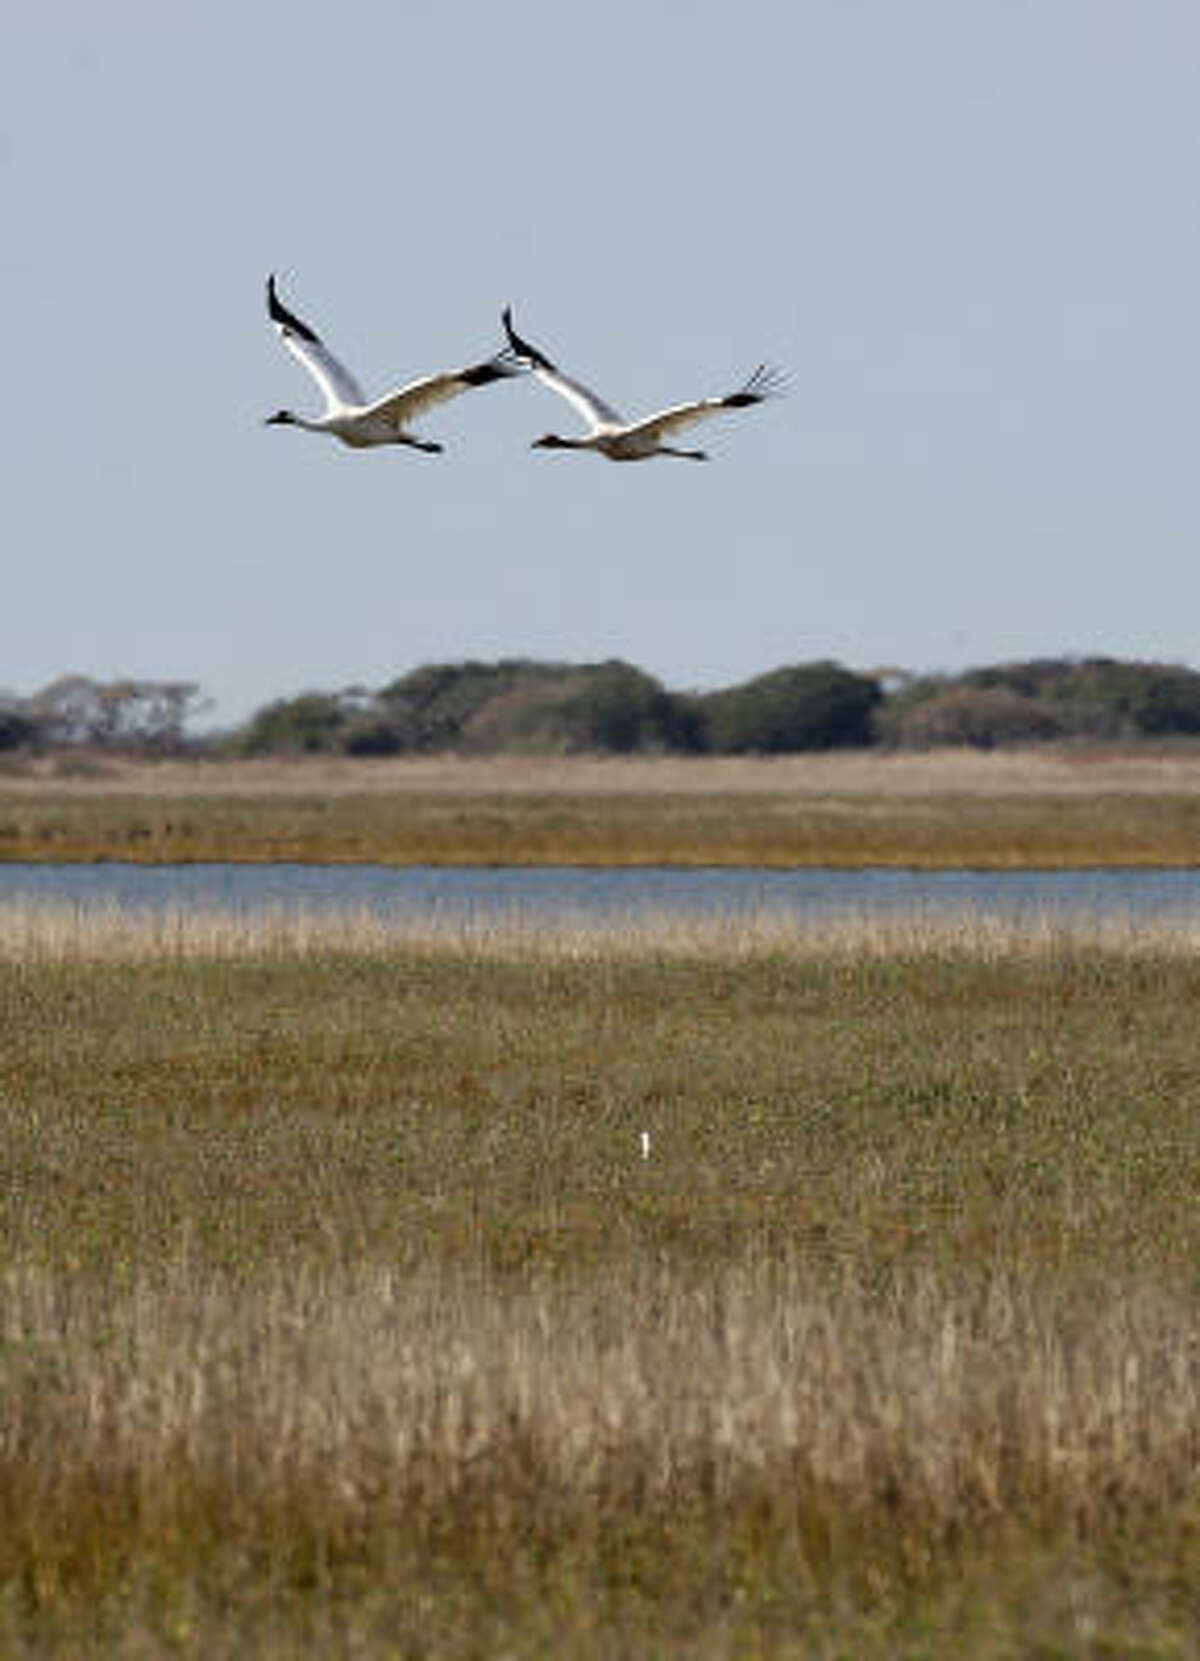 Two whooping cranes fly over the grassland of the Aransas National Wildlife Refuge in December 2008. Last winter was a difficult one for the cranes.